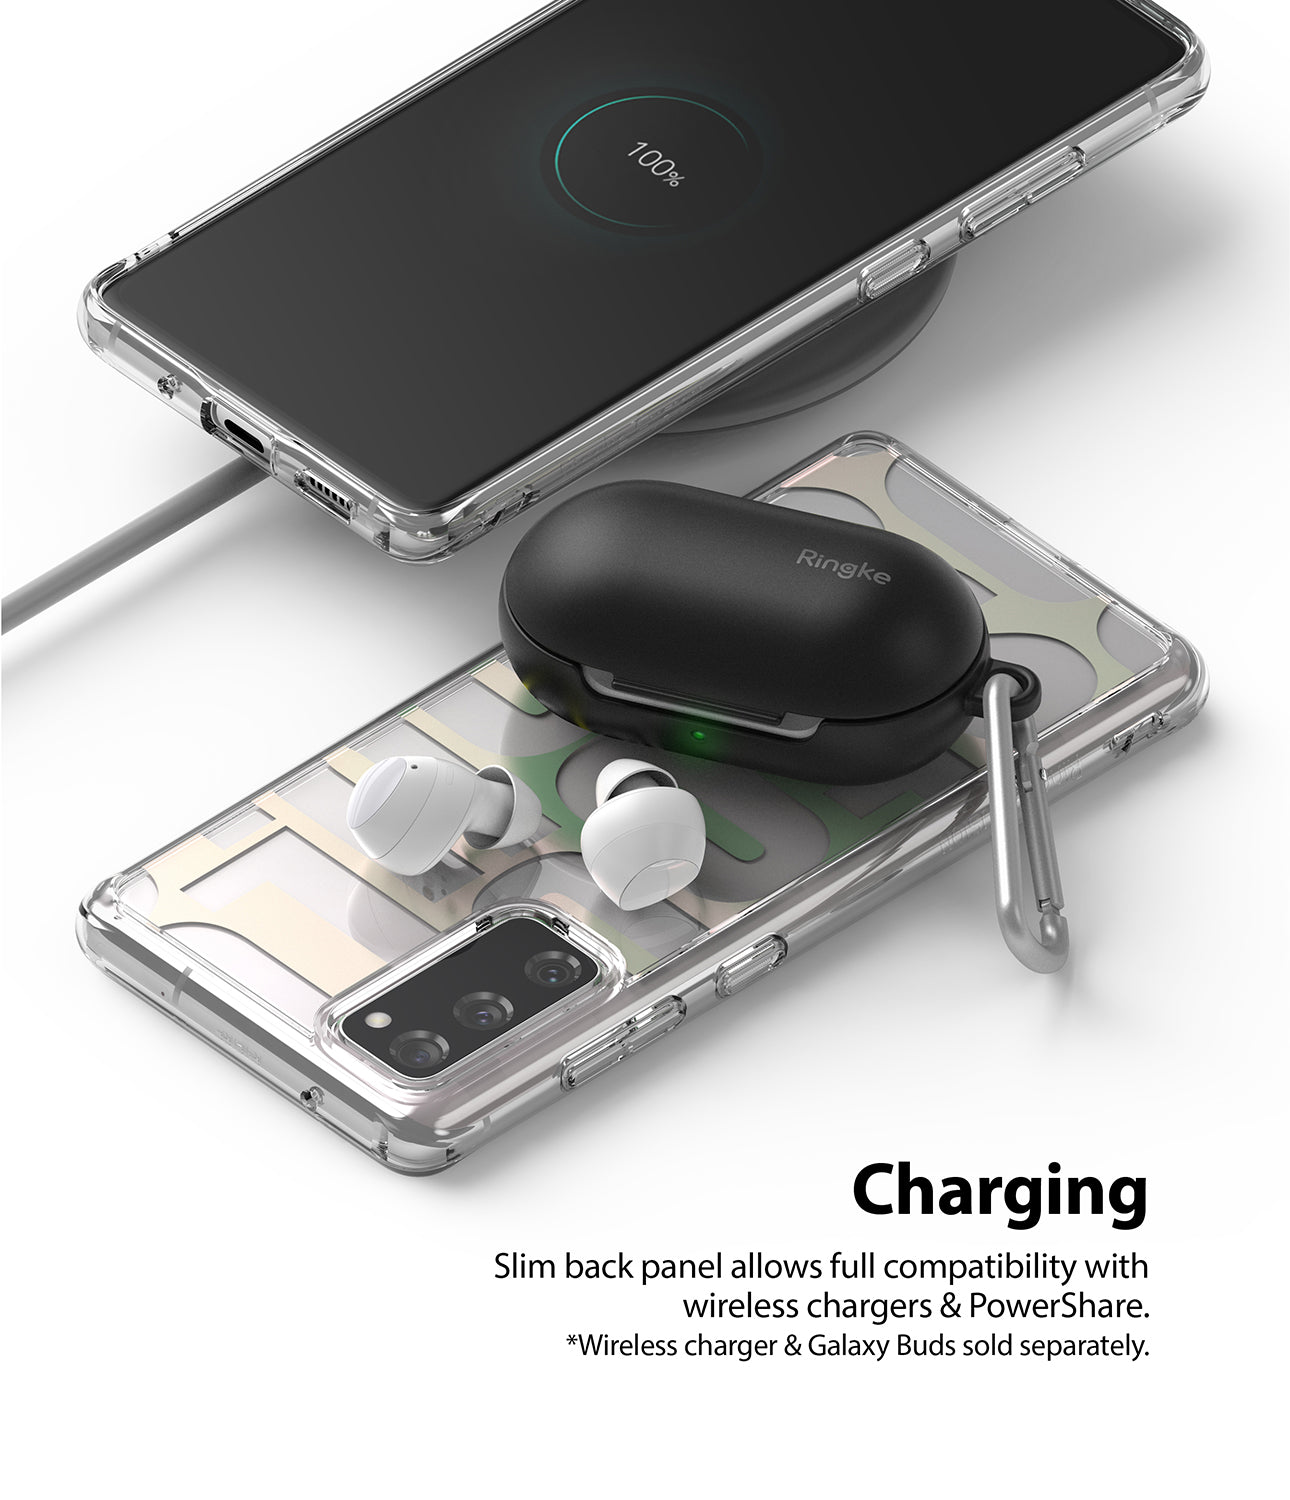 slim back panel allows full compatibility with wireless chargers and powershare